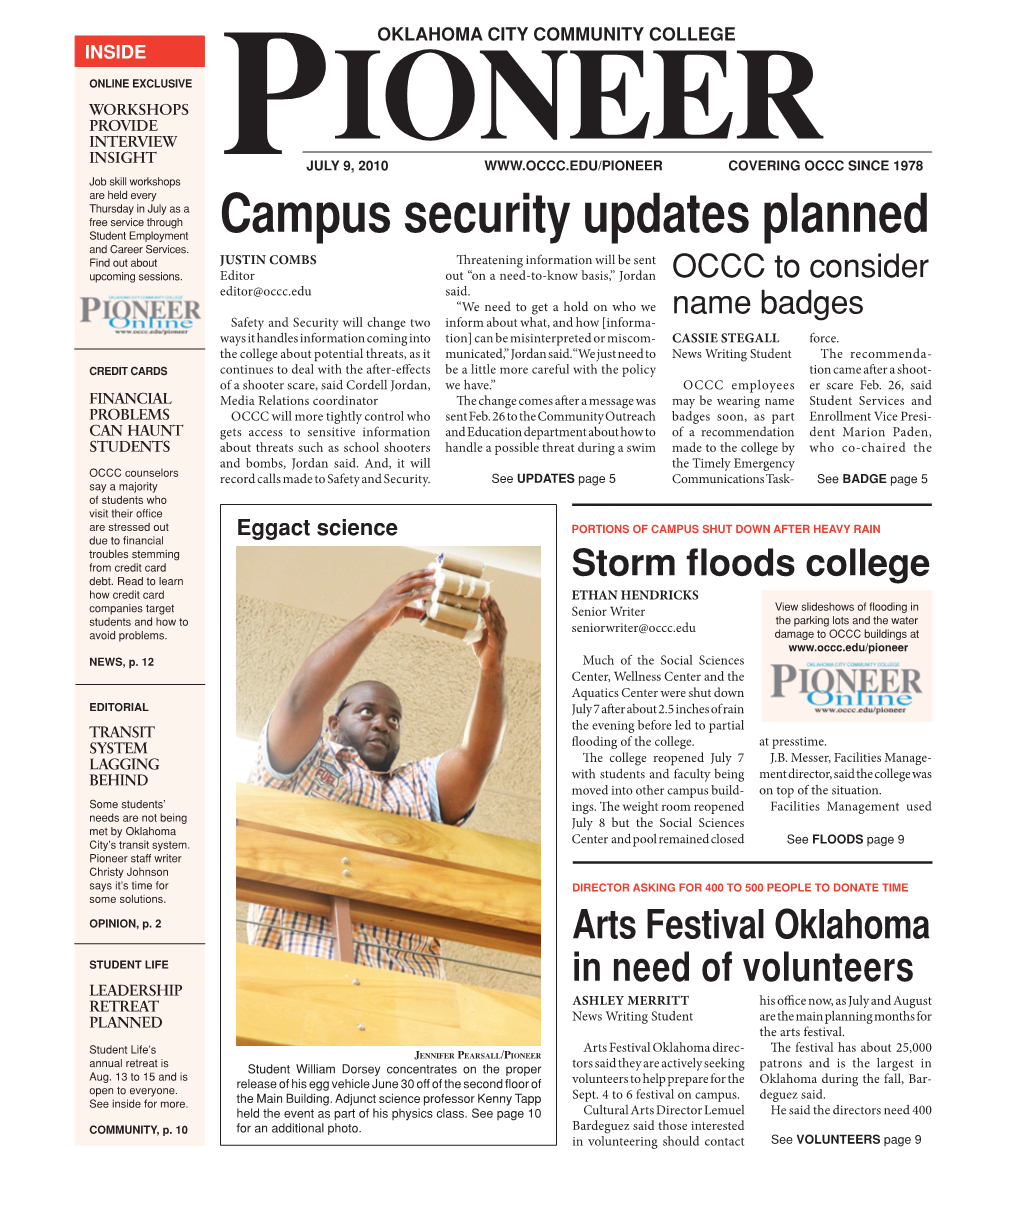 Campus Security Updates Planned and Career Services